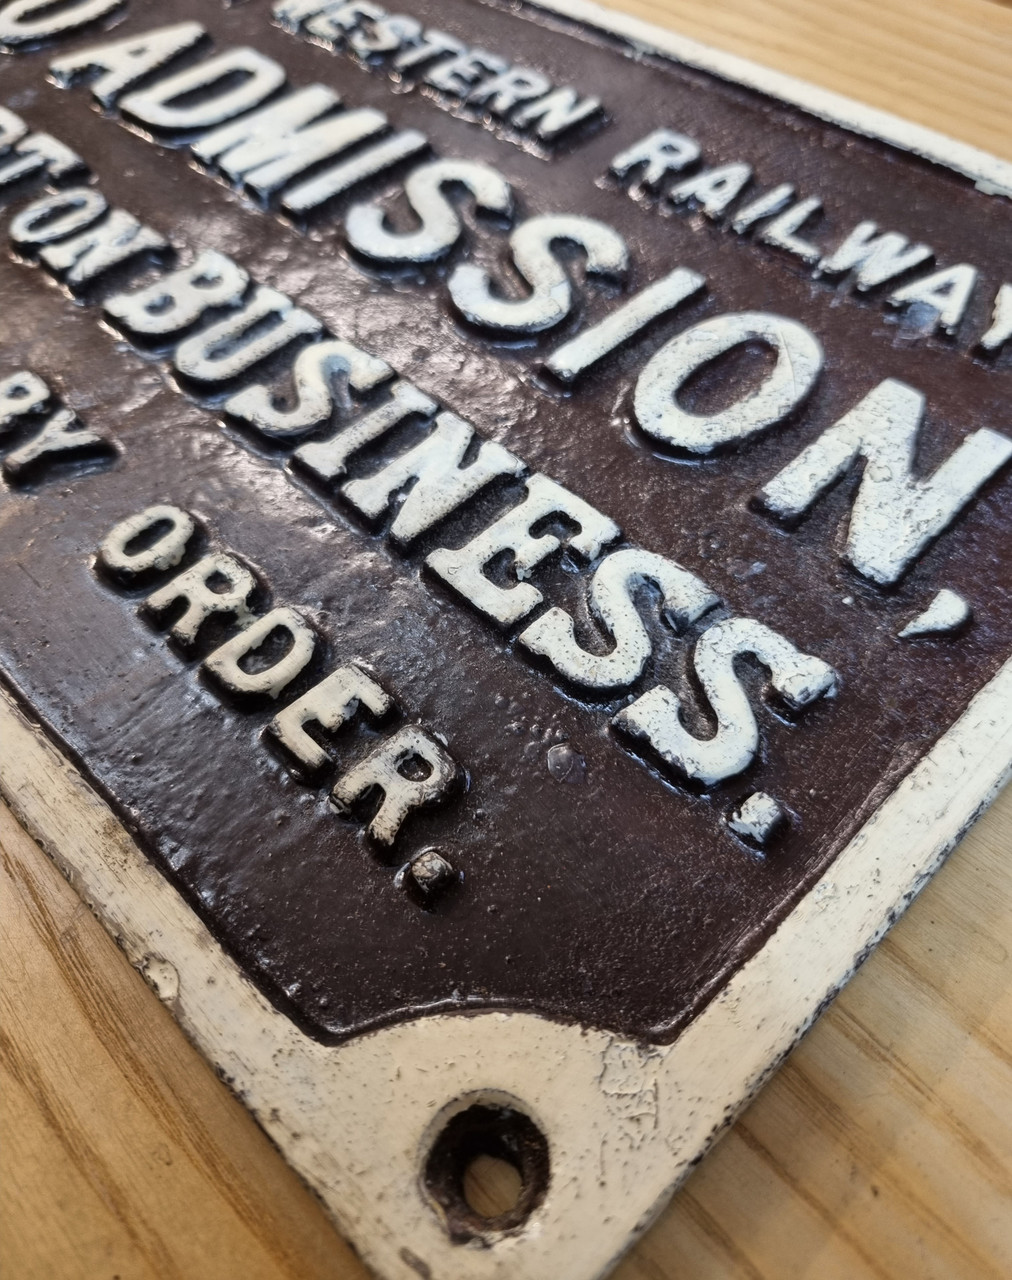 RA 6885A  G.W.R. CAST IRON "NO ADDMISSION EXCEPT ON BUSINESS" DOORPLATE